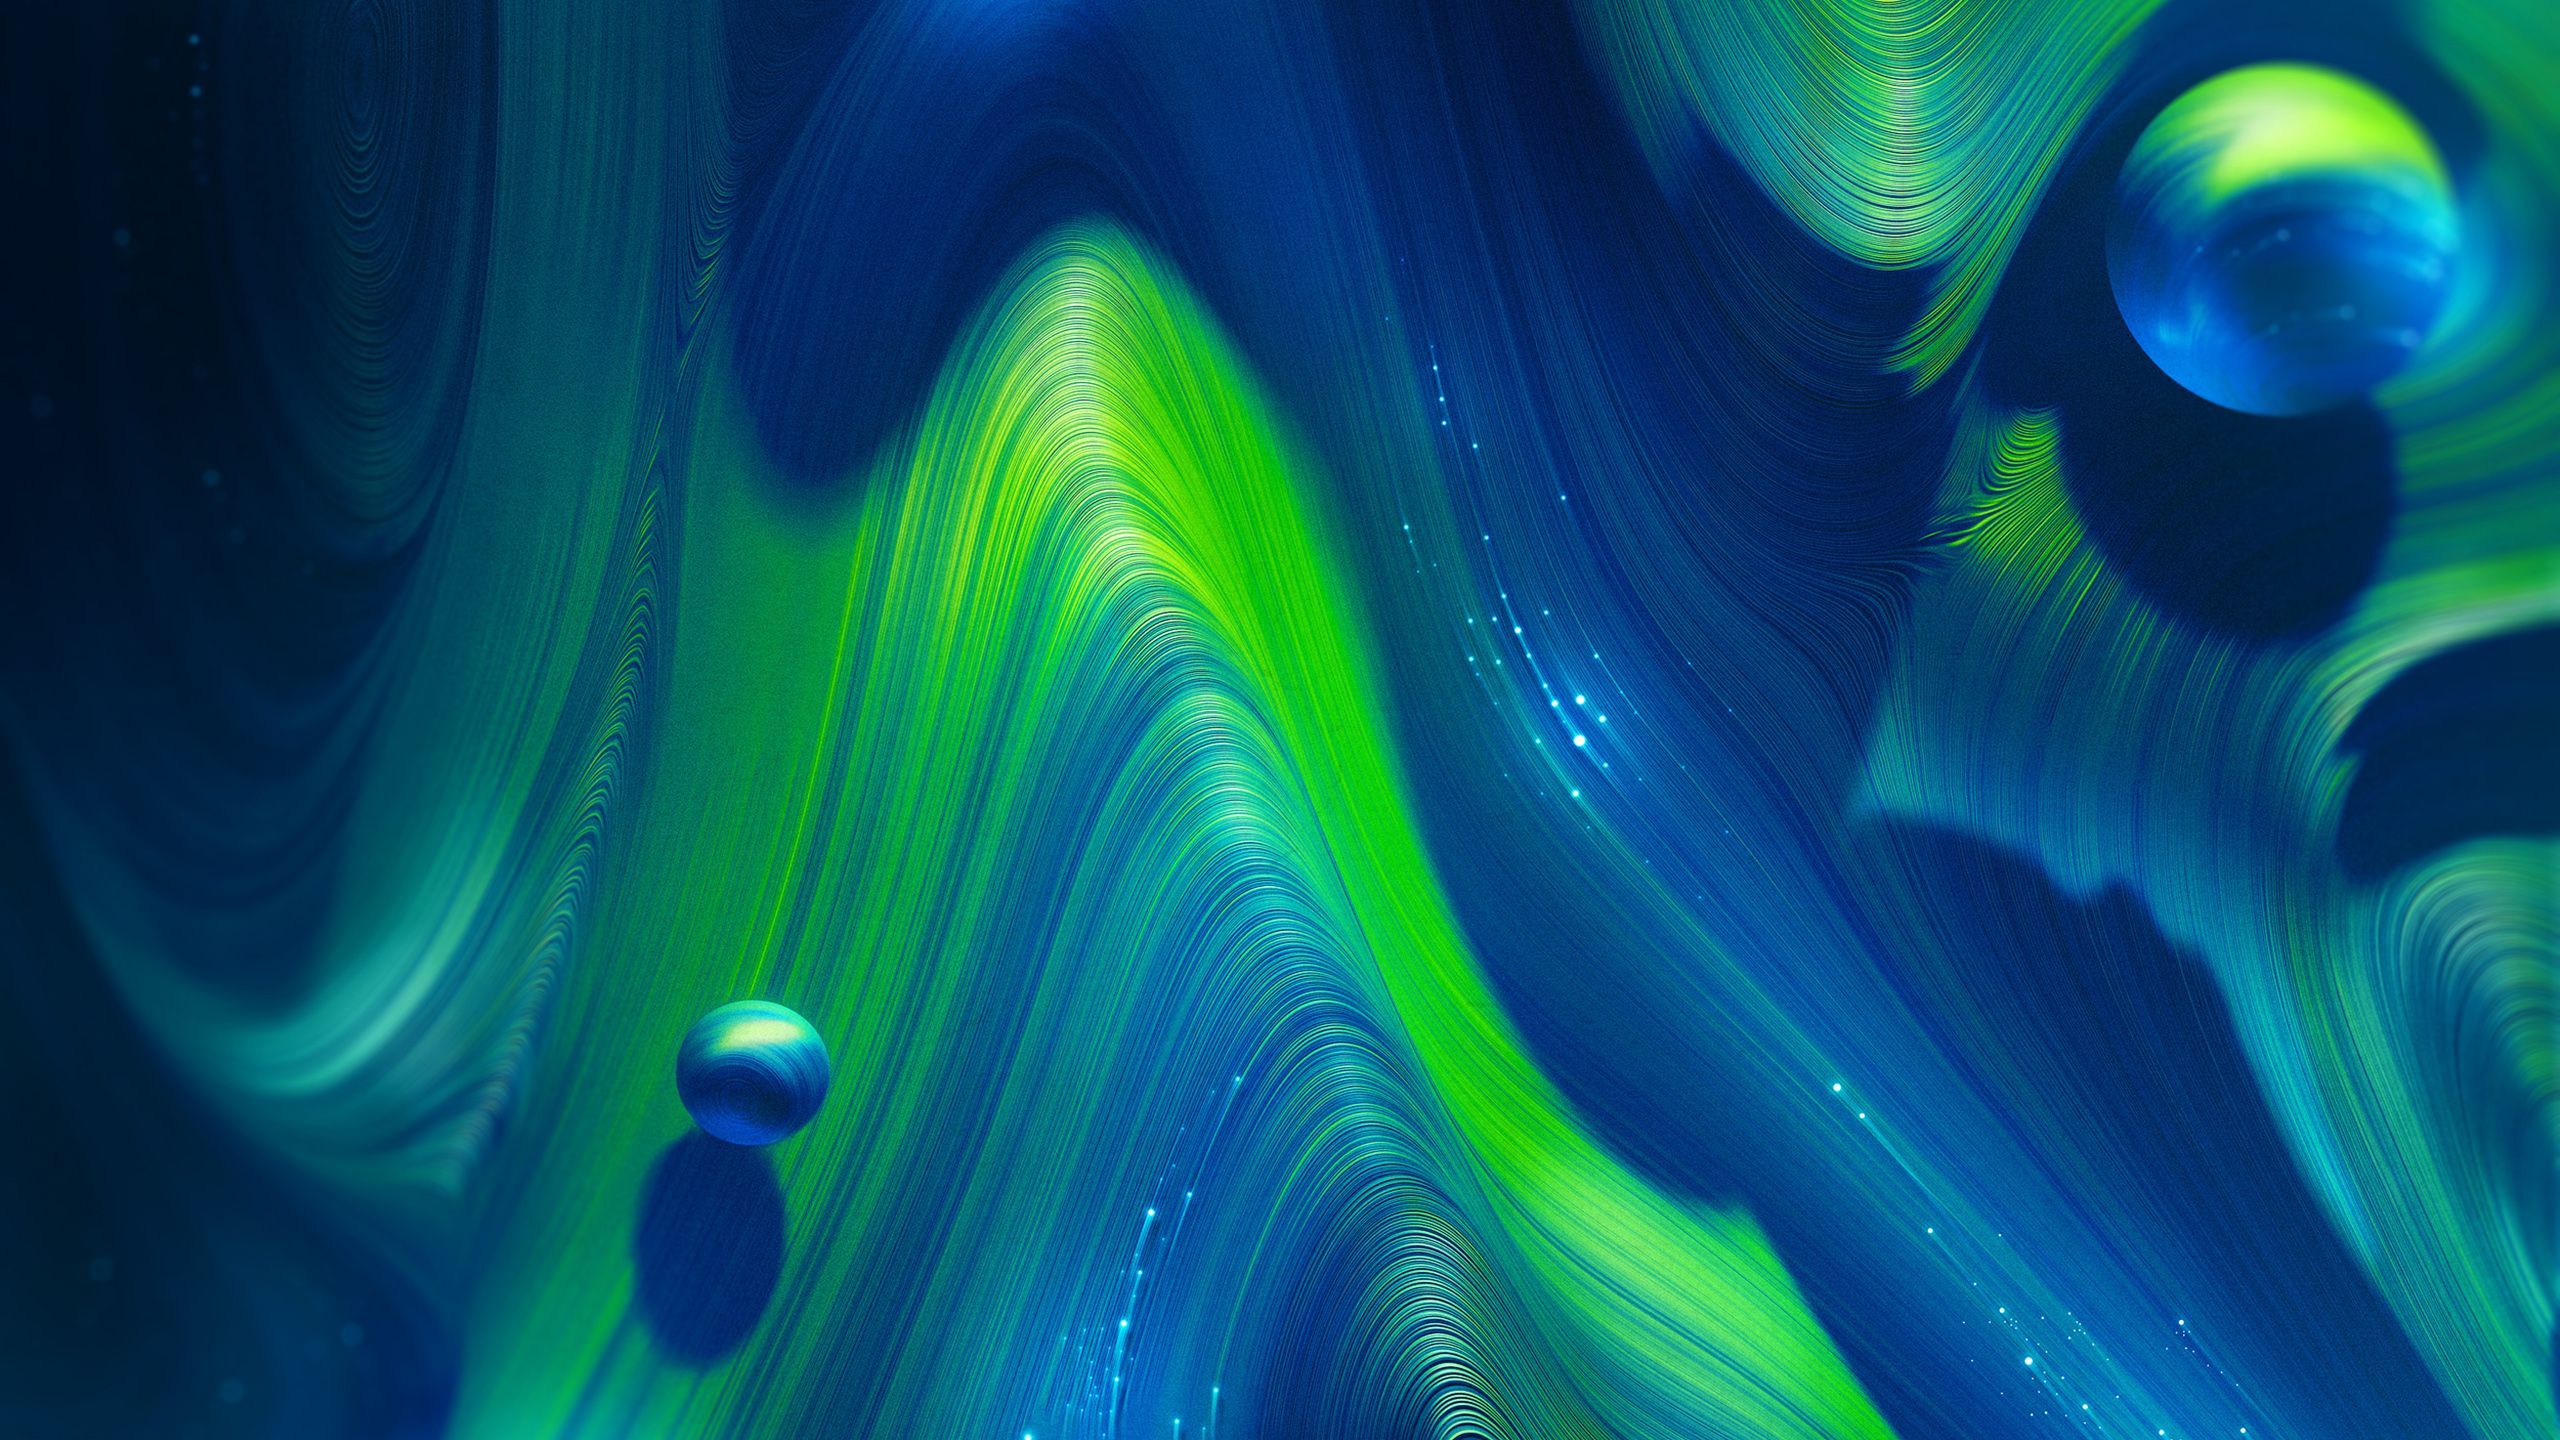 Blue and green graphic wallpapers